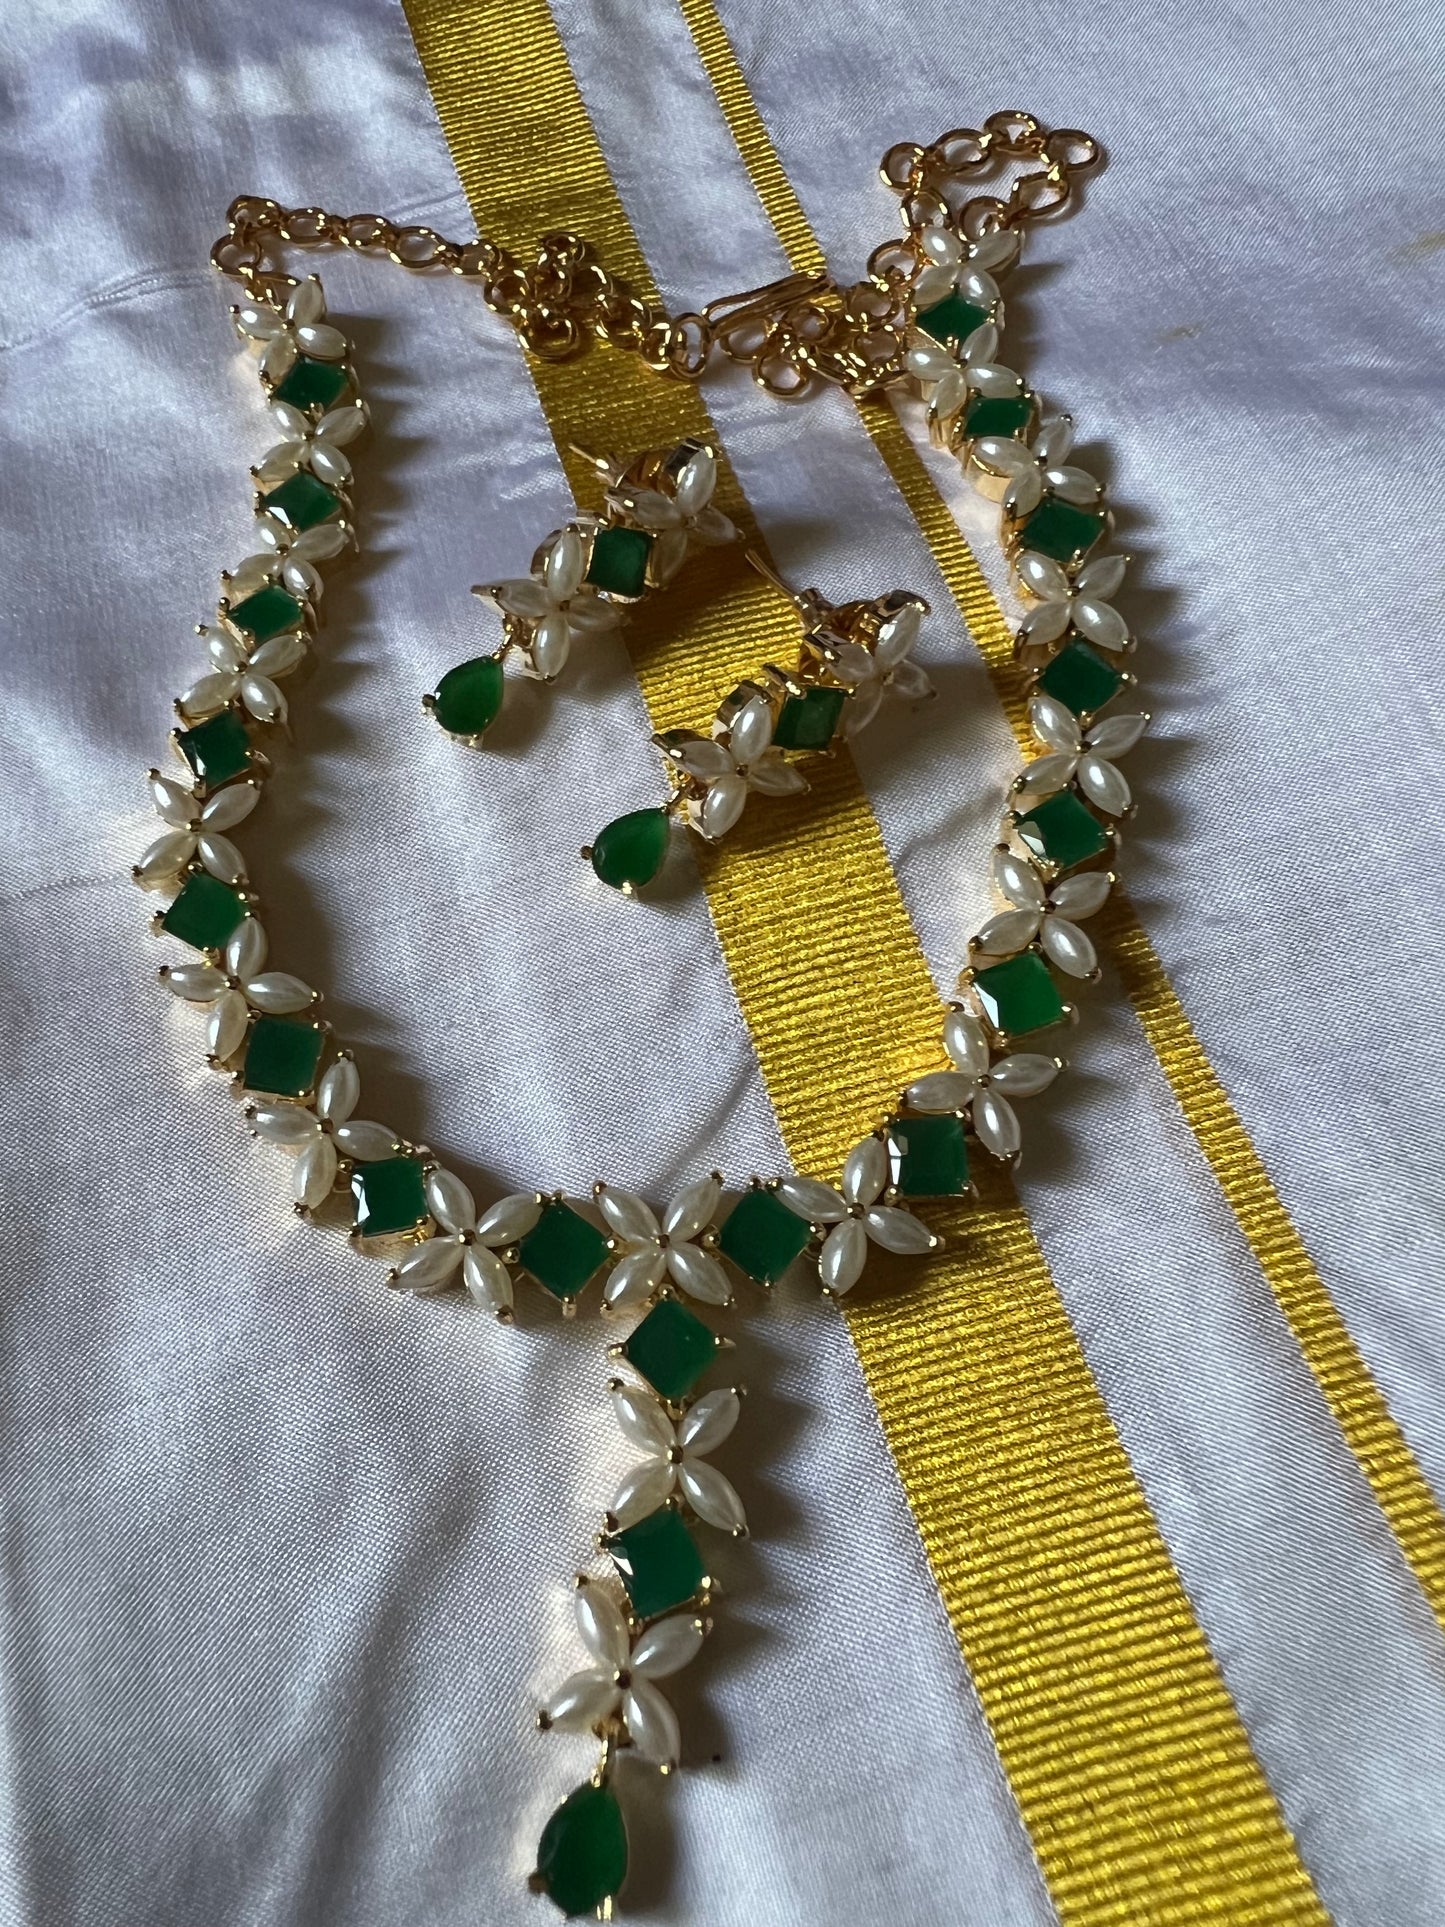 Jewellery/ Indian cosmetic jewellery with stones and metal